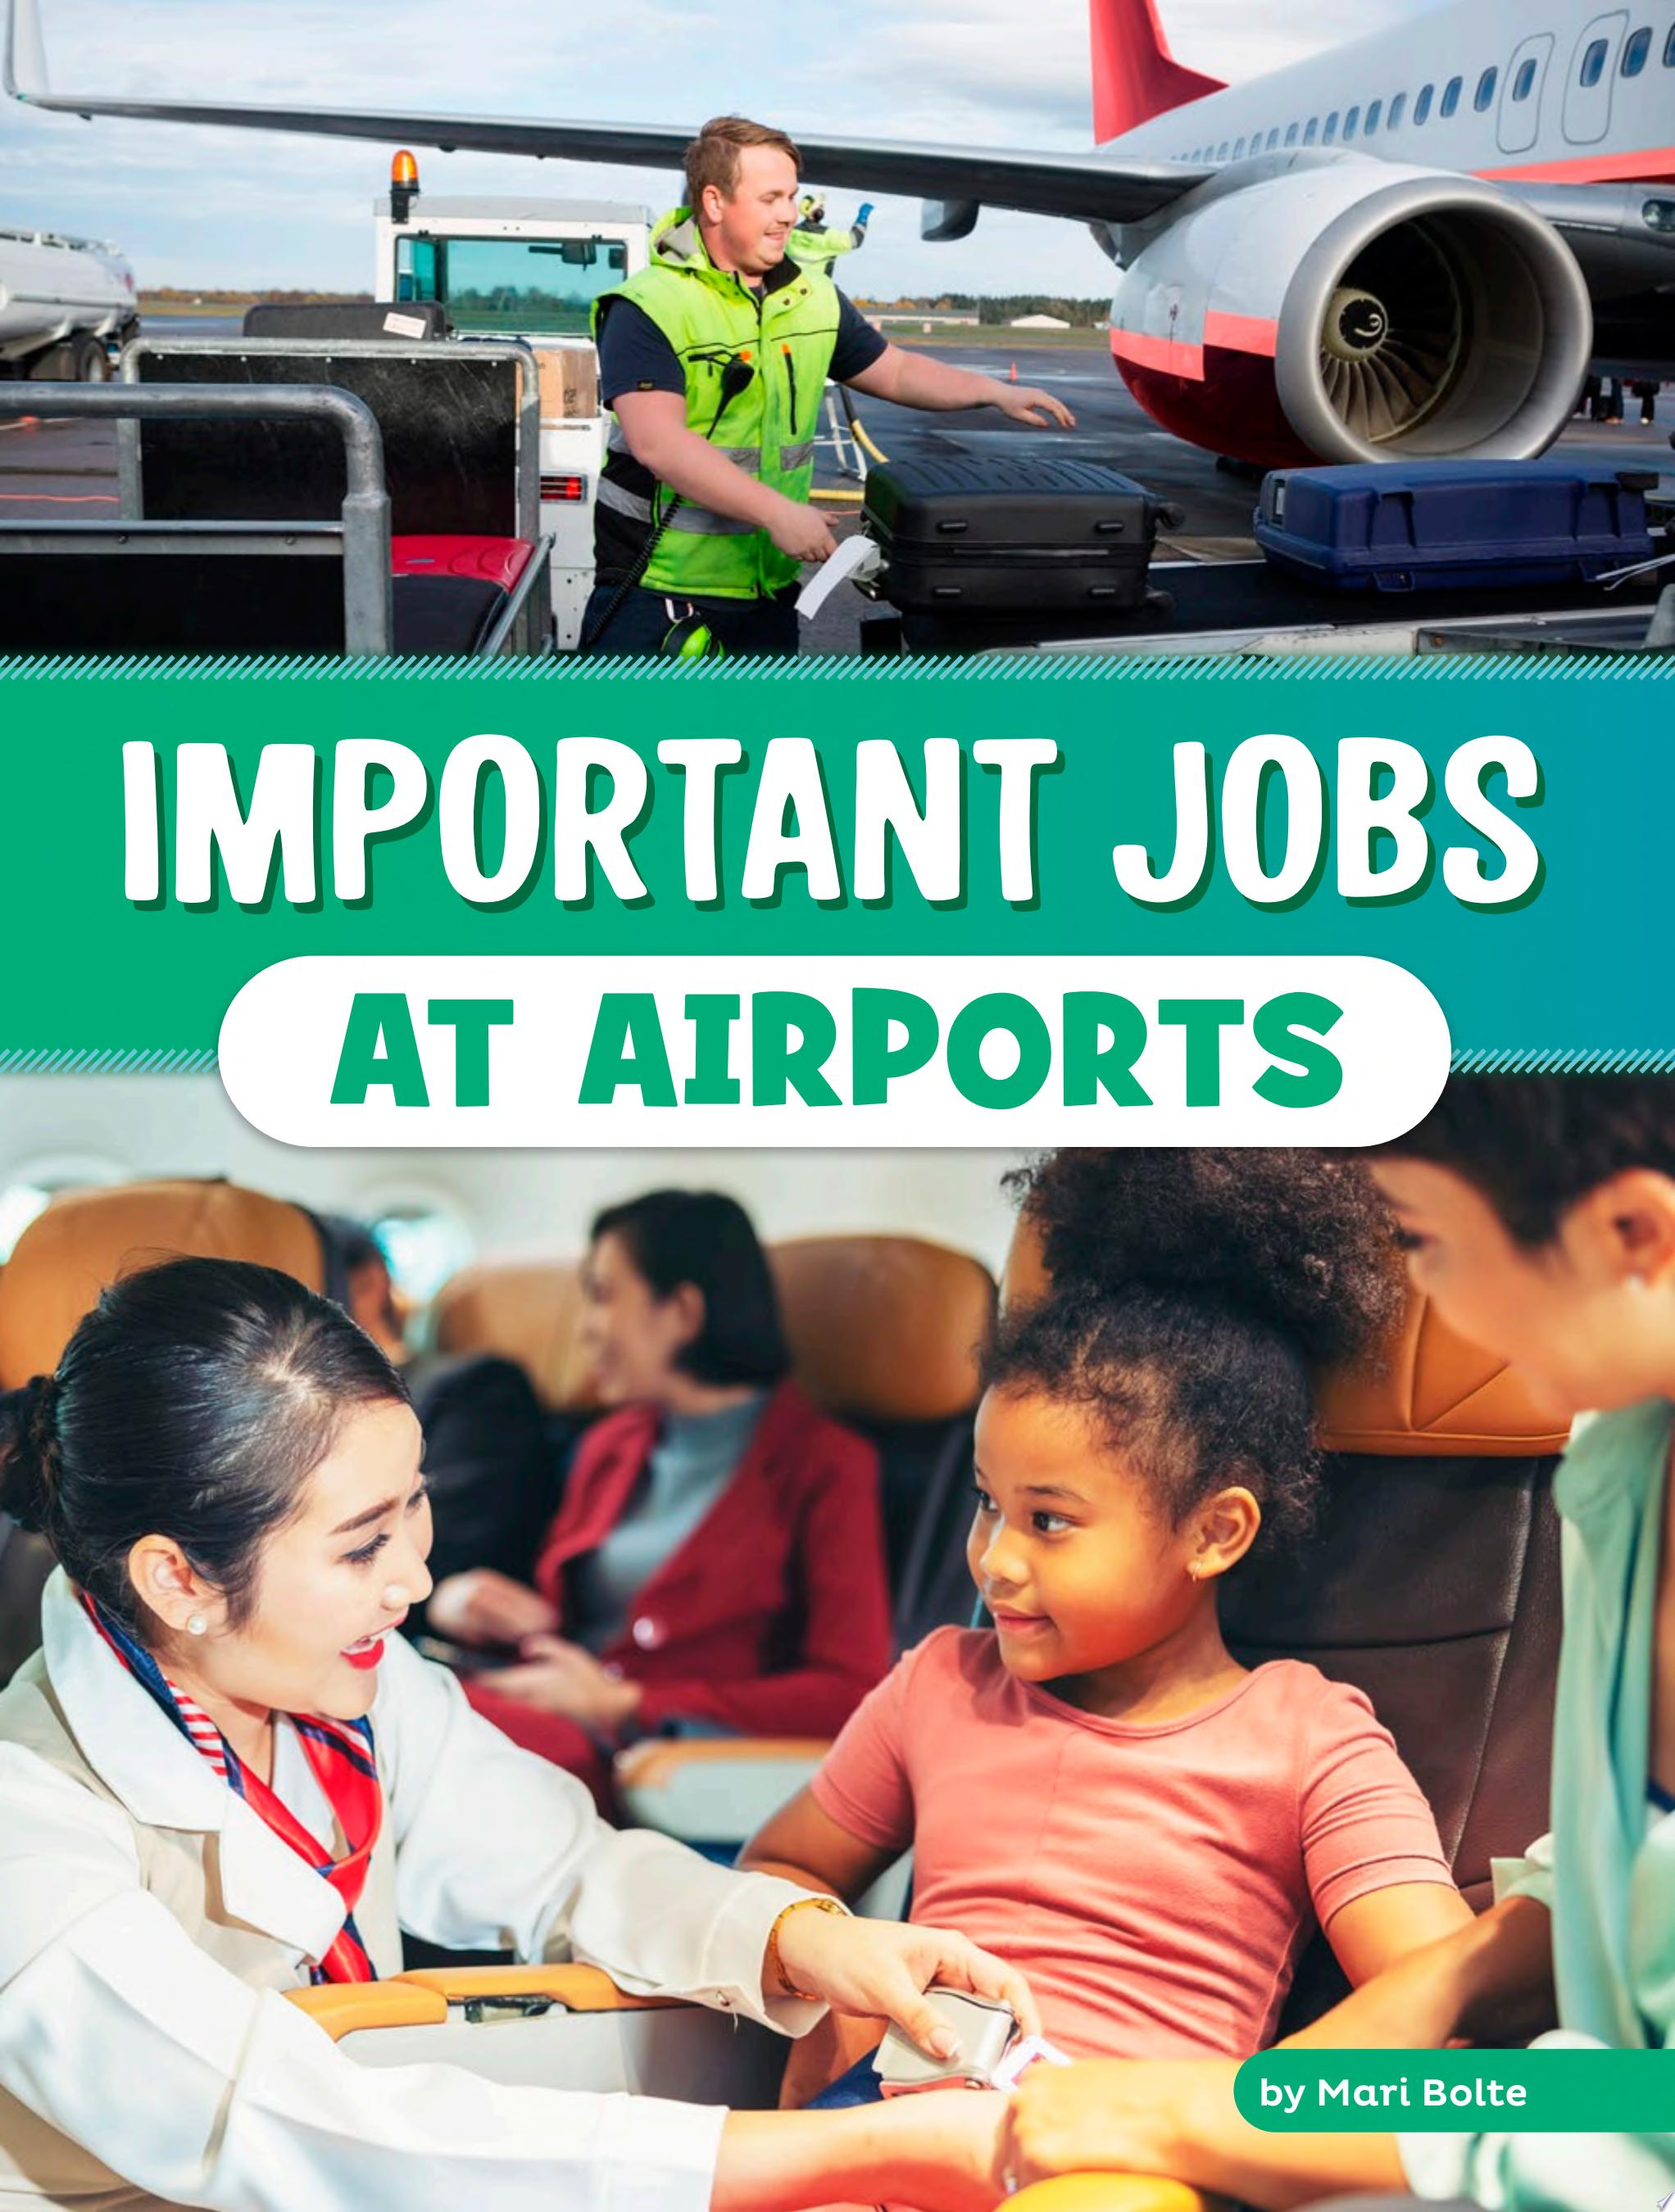 Image for "Important Jobs at Airports"